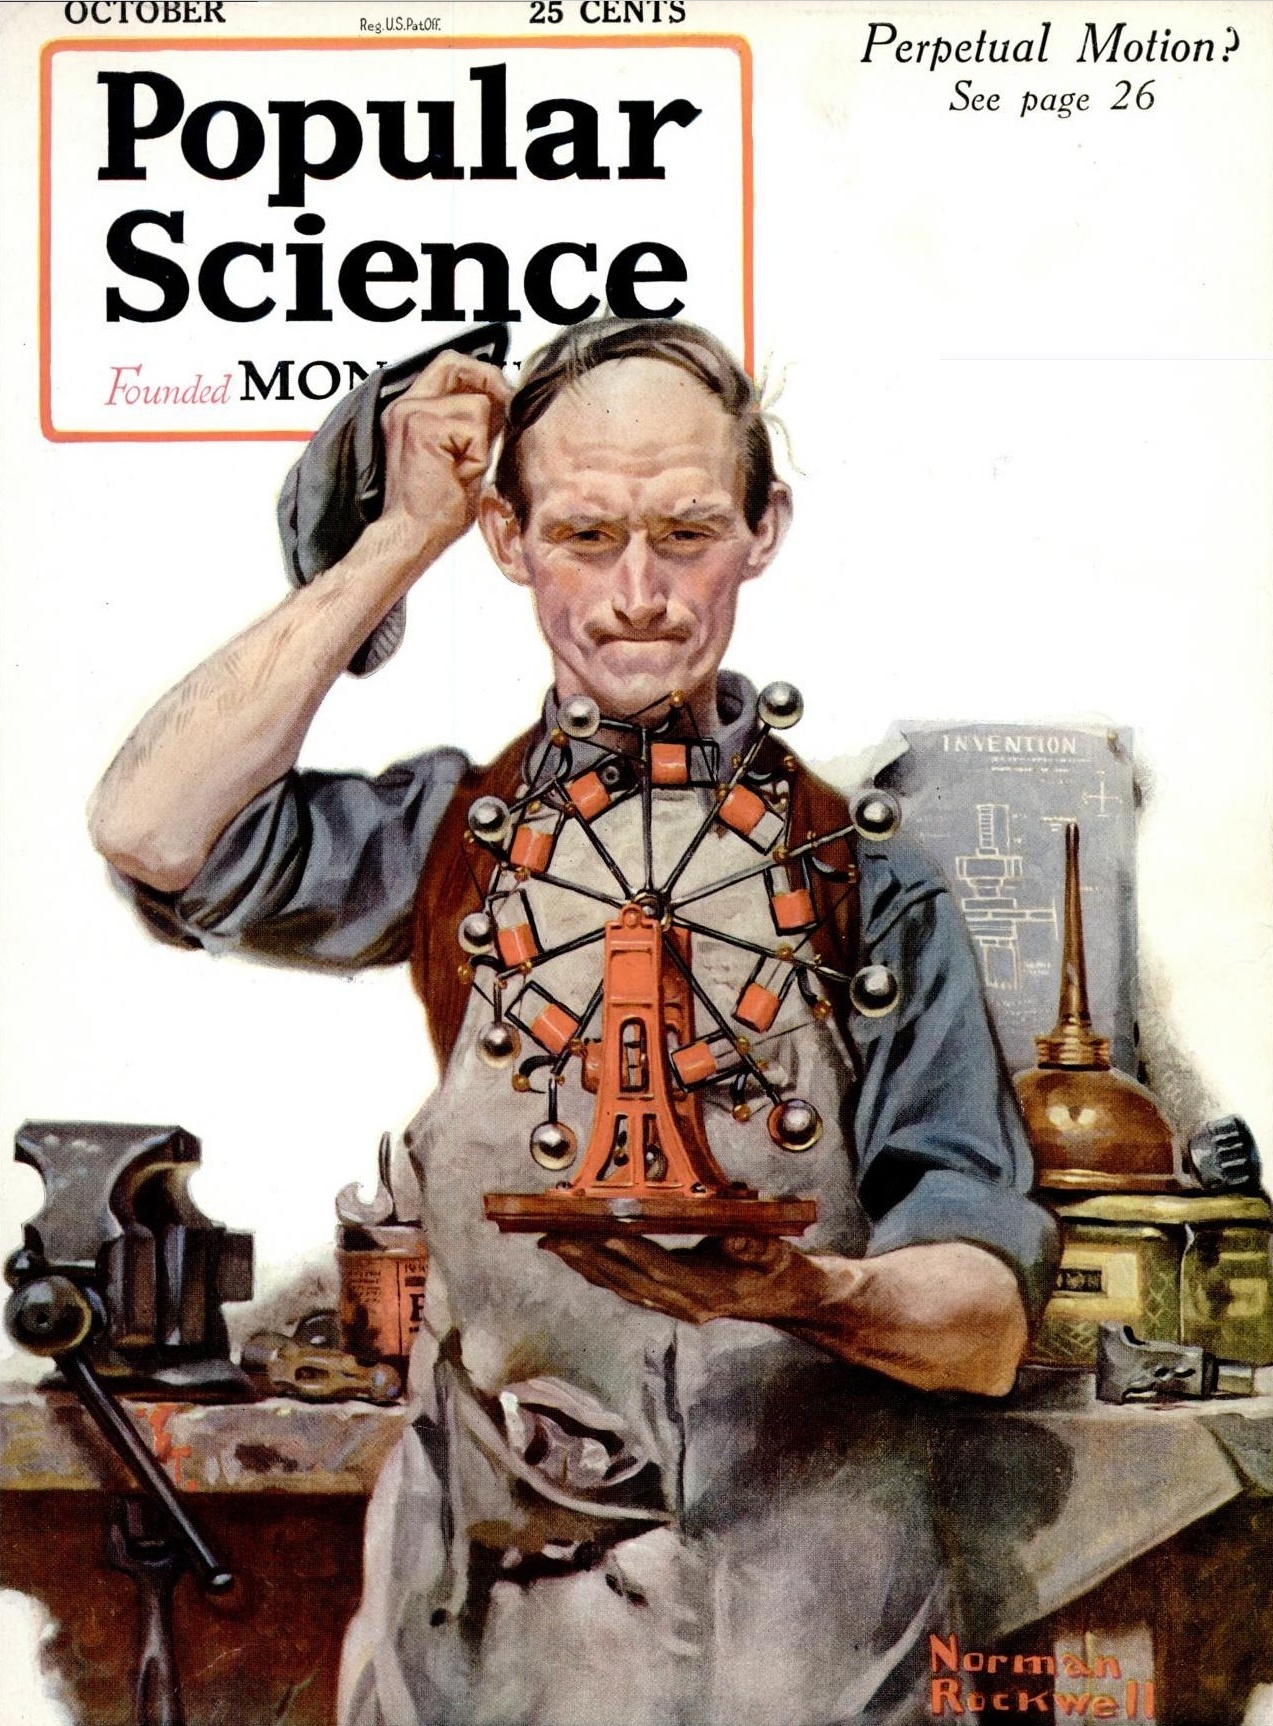 Popular Science magazine, Norman Rockwell, perpetual motion machine